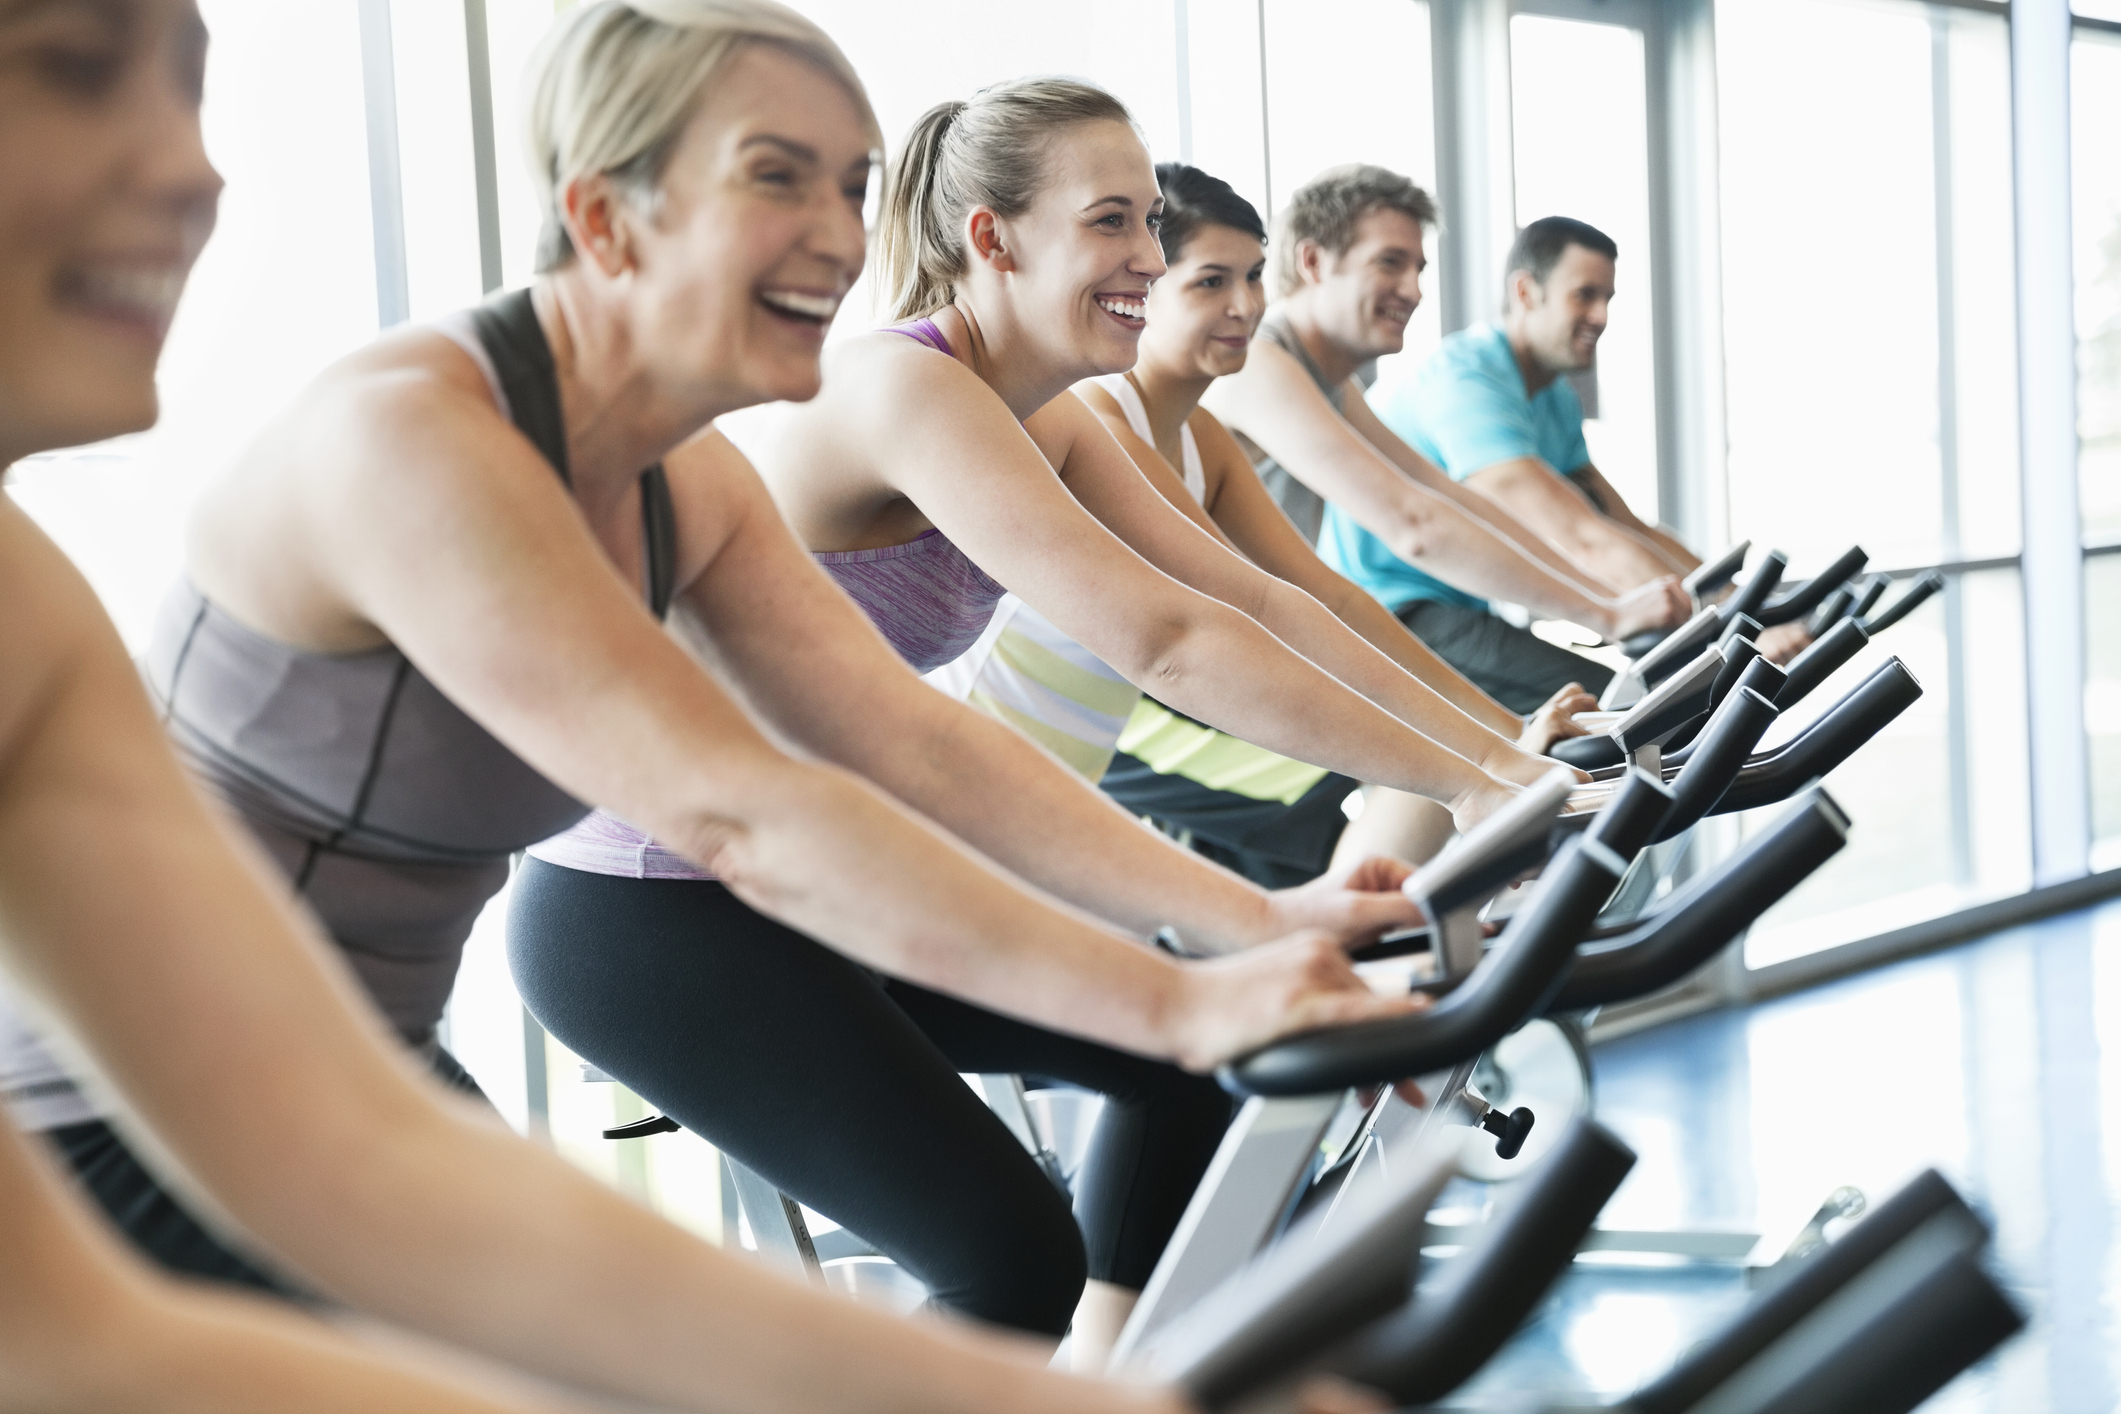 Pedal Toward Your Goals at Flower Mound Cyclebar